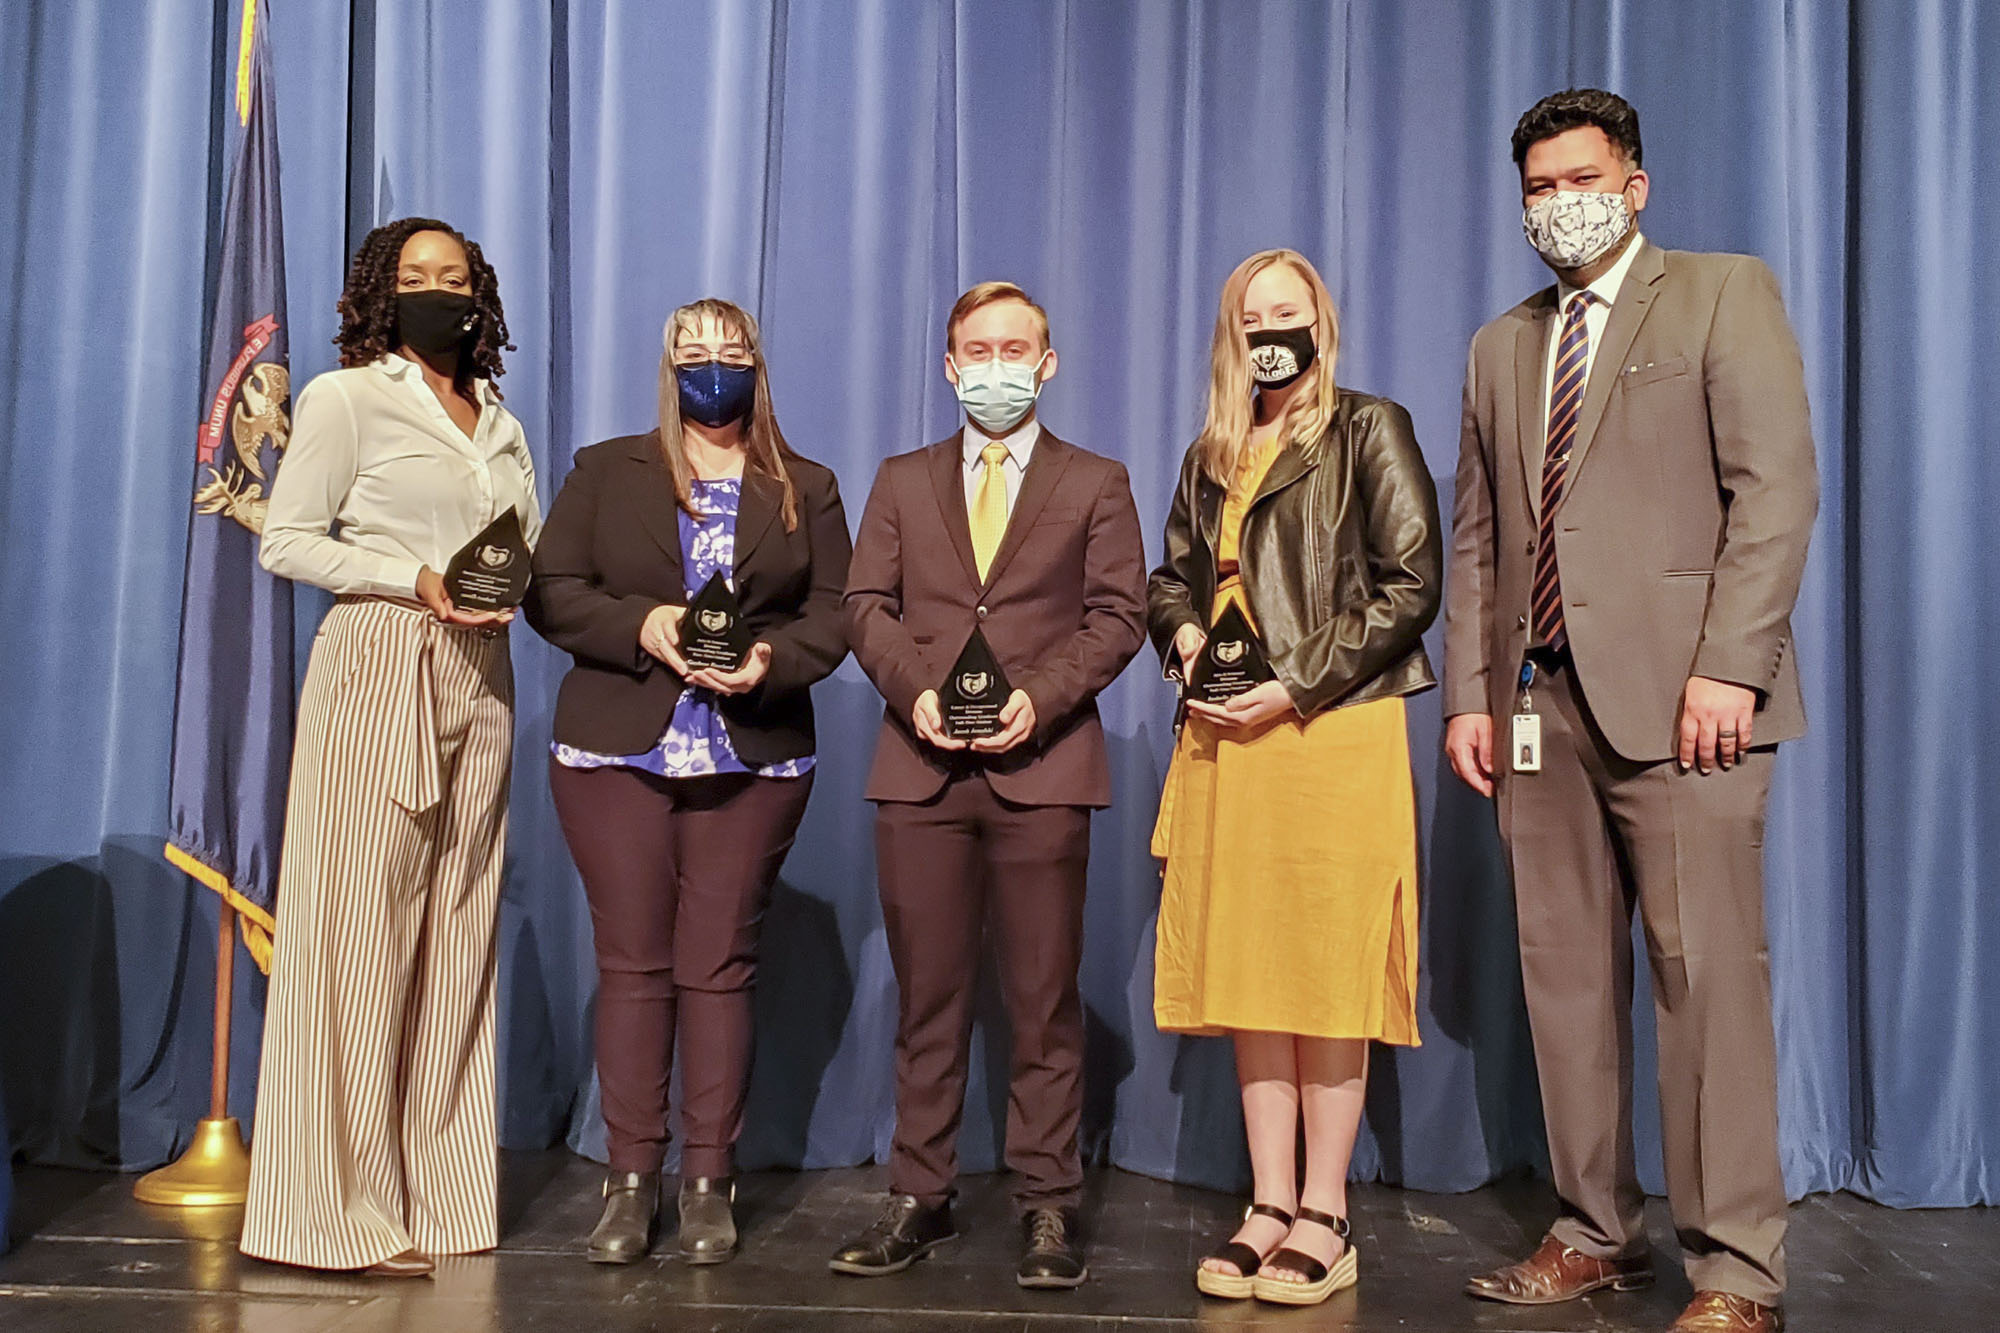 The 2021 Outstanding Division Graduates accept their awards. From left to right are Dr. Adrien Bennings, president of KCC; Gaylene Rowland; Jacob Janofski; Isabella Proulx; and Dr. Paul Watson, vice president for Instruction at KCC. Not pictured are student award winners Robert Essex and Sarah Smith.